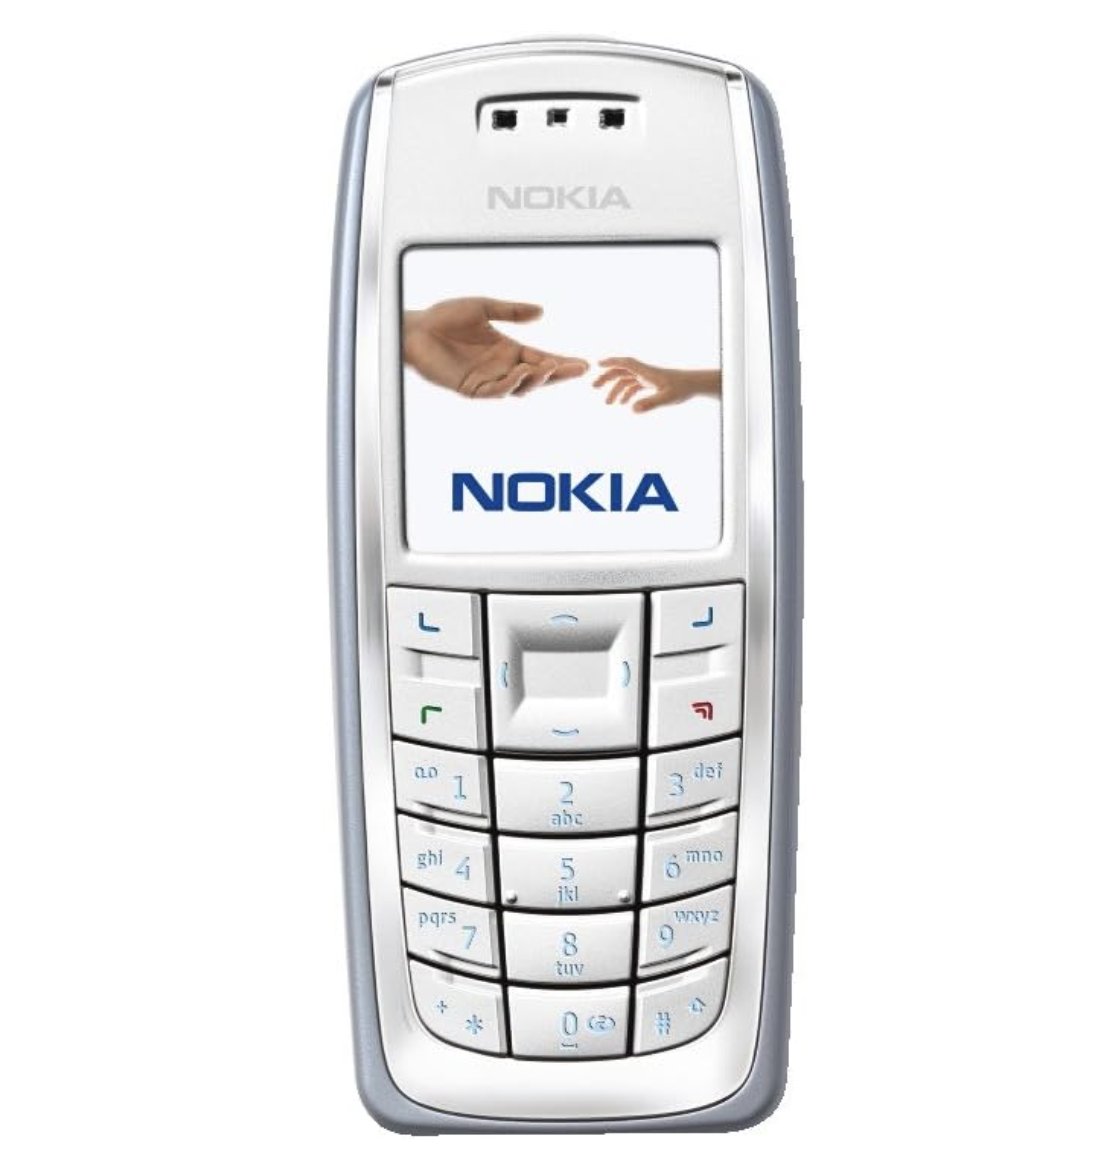 My first phone. Share yours...